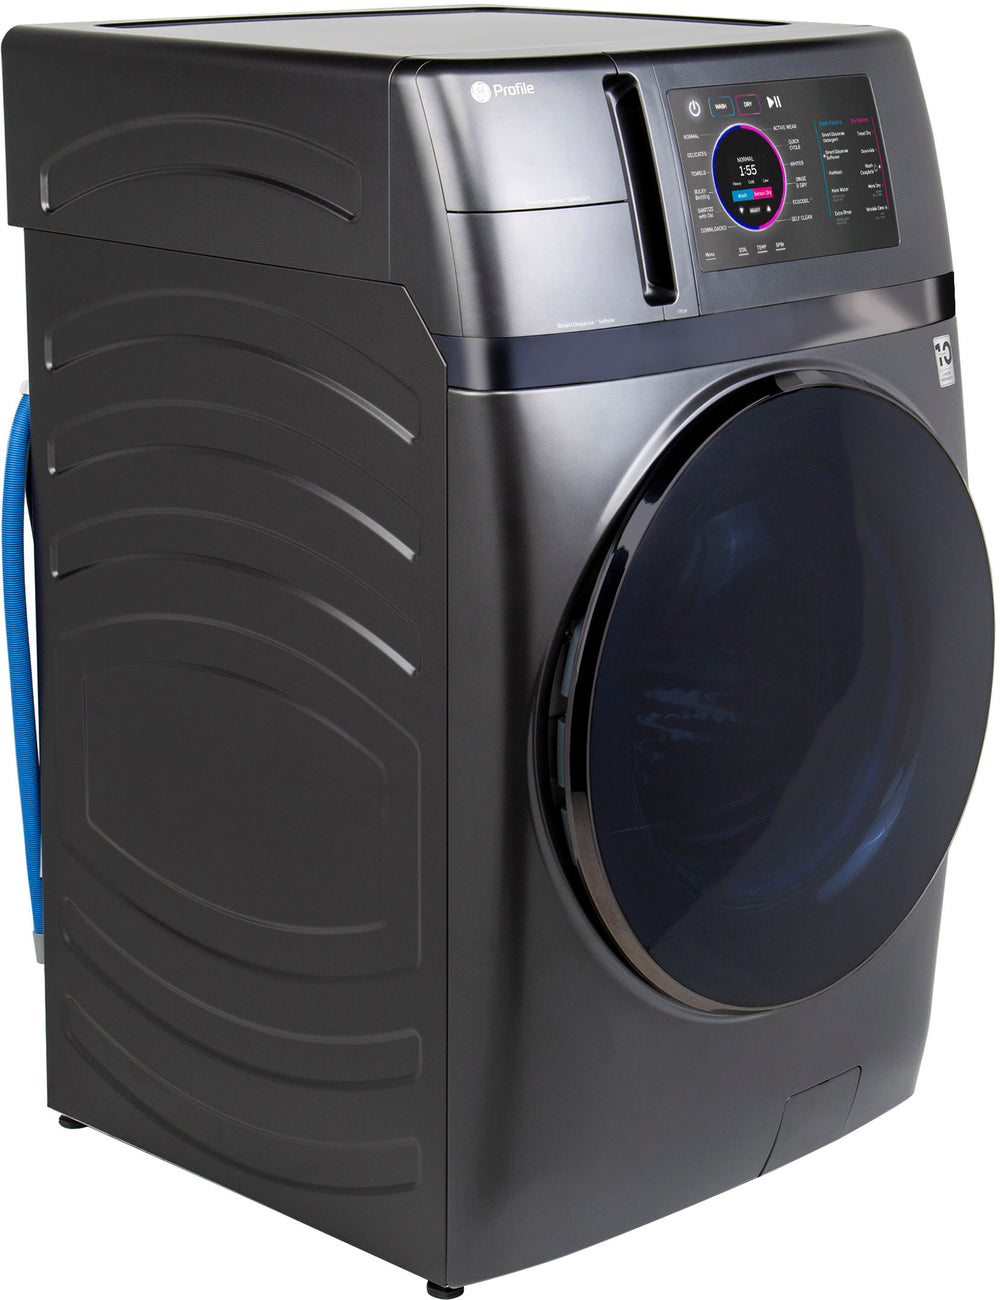 GE Profile - UltraFast 4.8 cu ft Large Capacity All-in-One Washer/Dryer Combo with Ventless Heat Pump Technology - Carbon Graphite_1